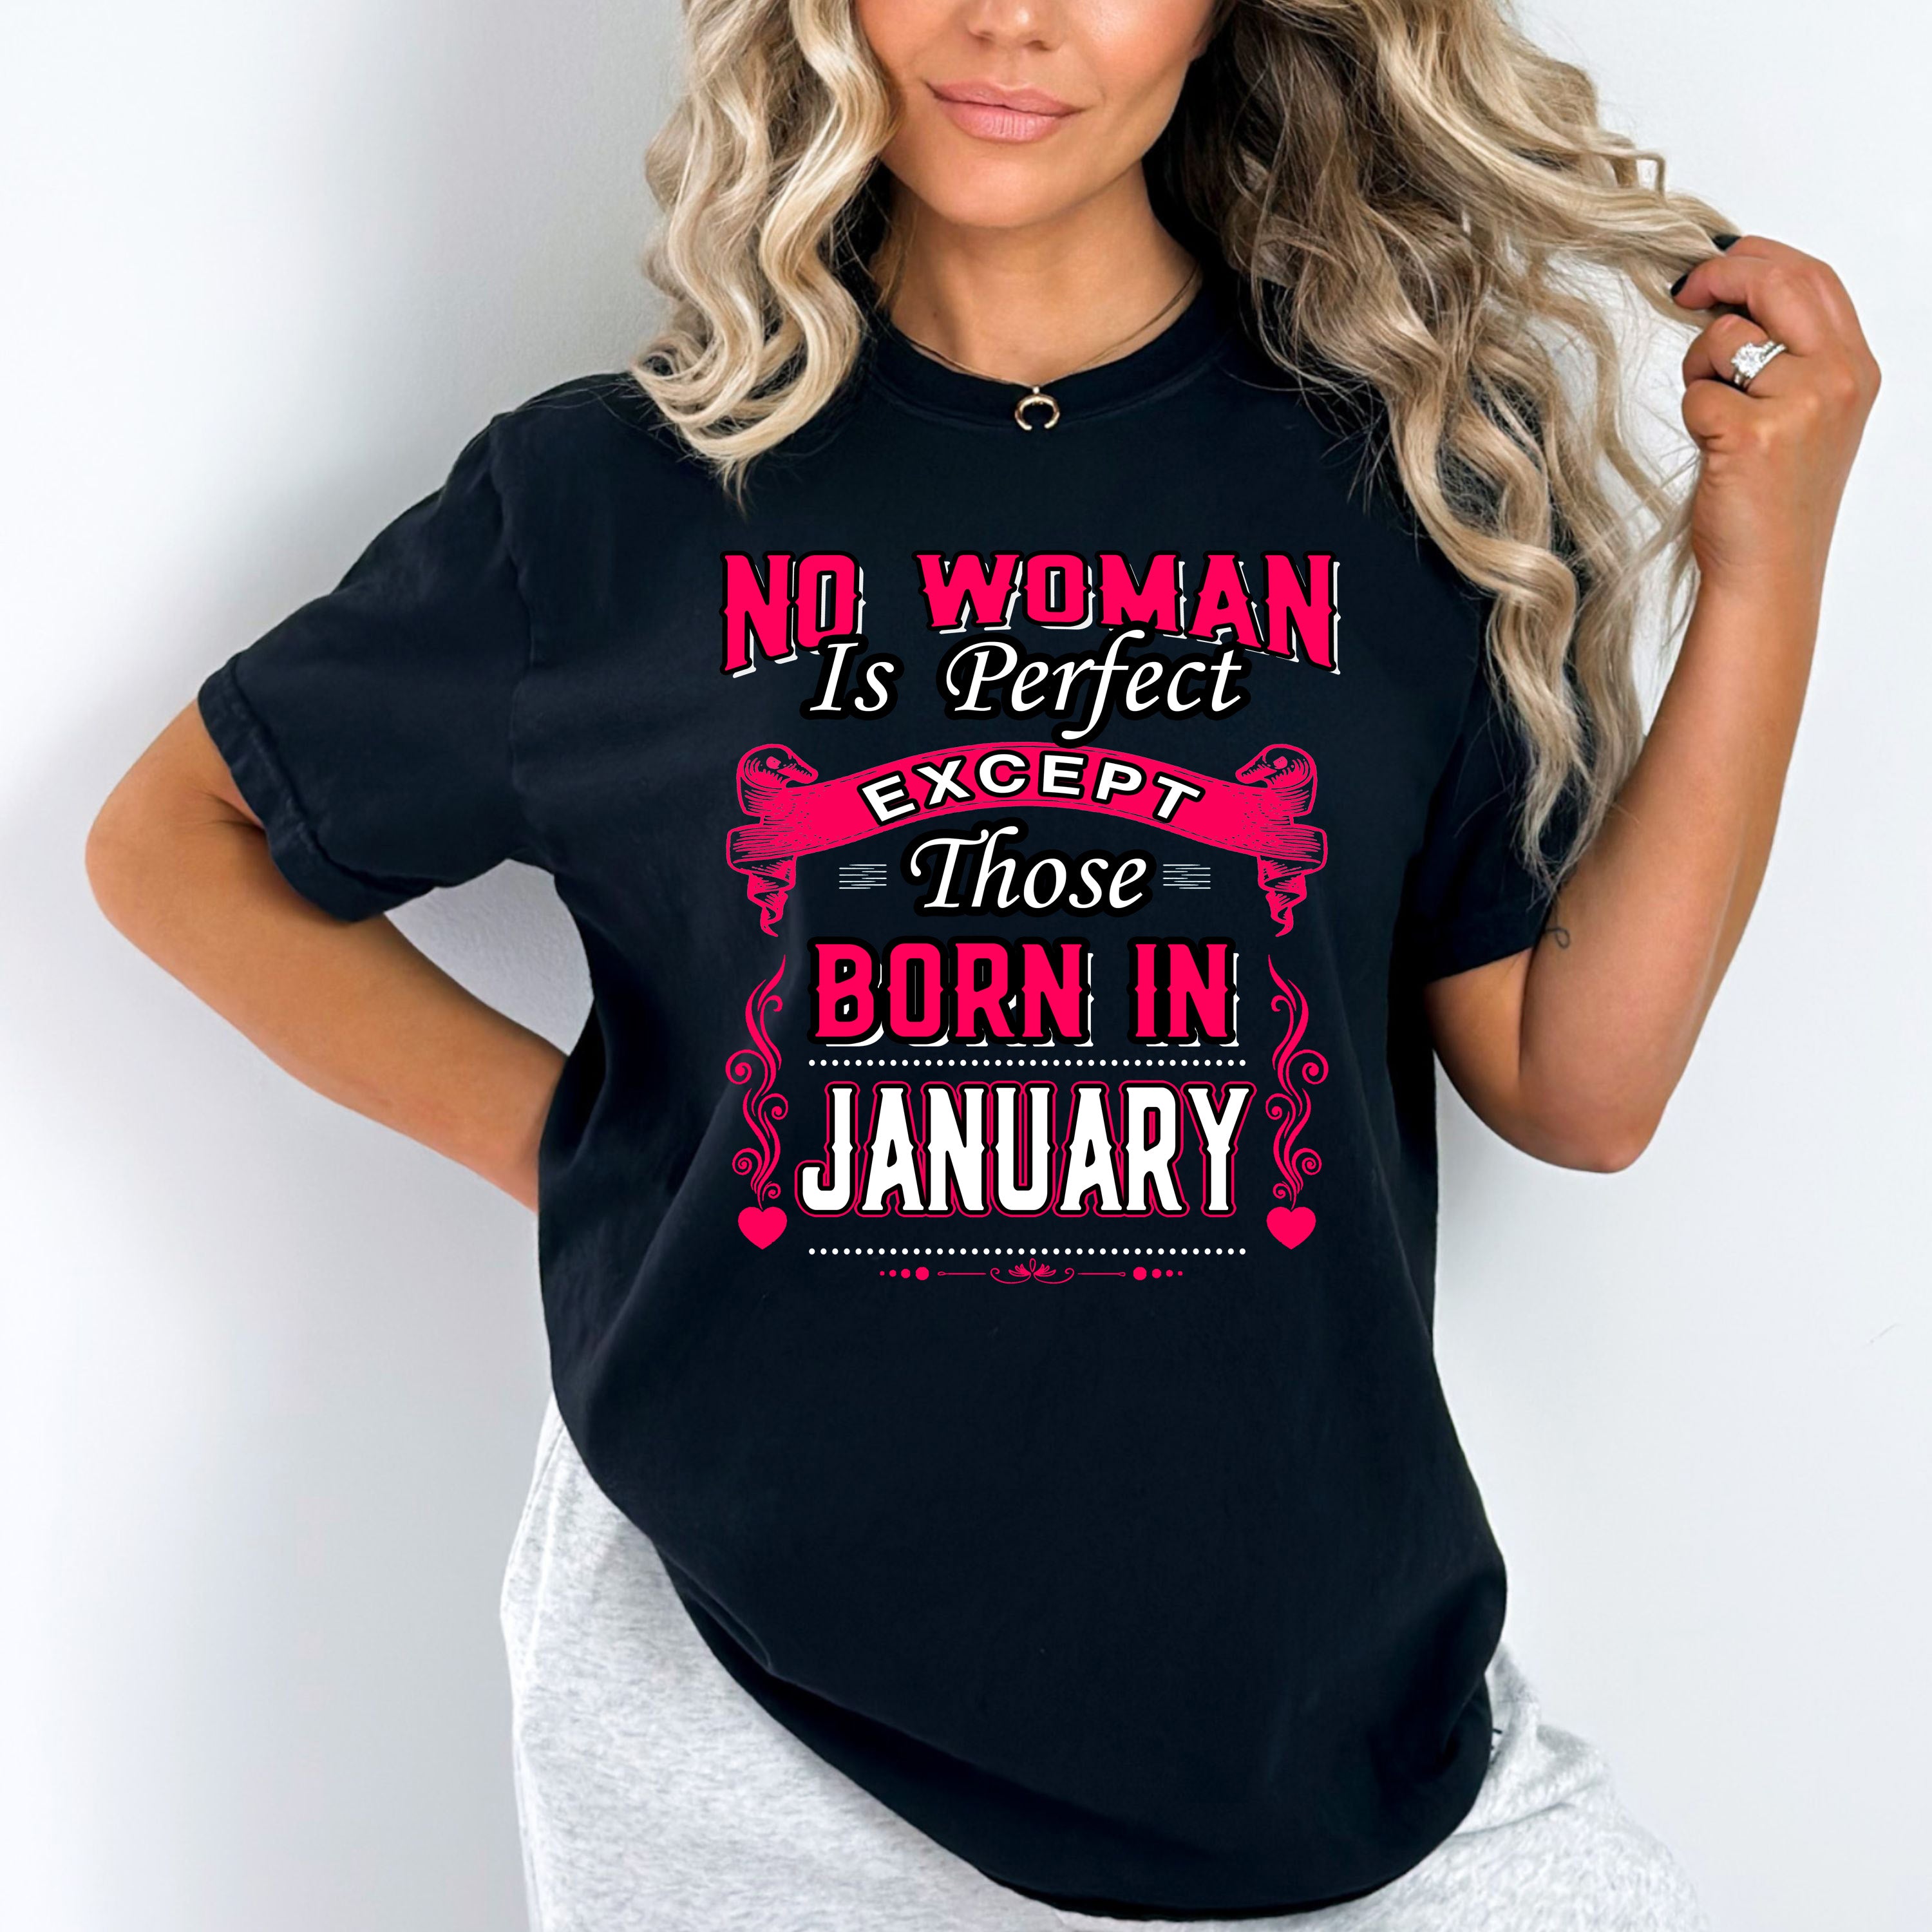 "No Woman Is Perfect Except Those Born In January"